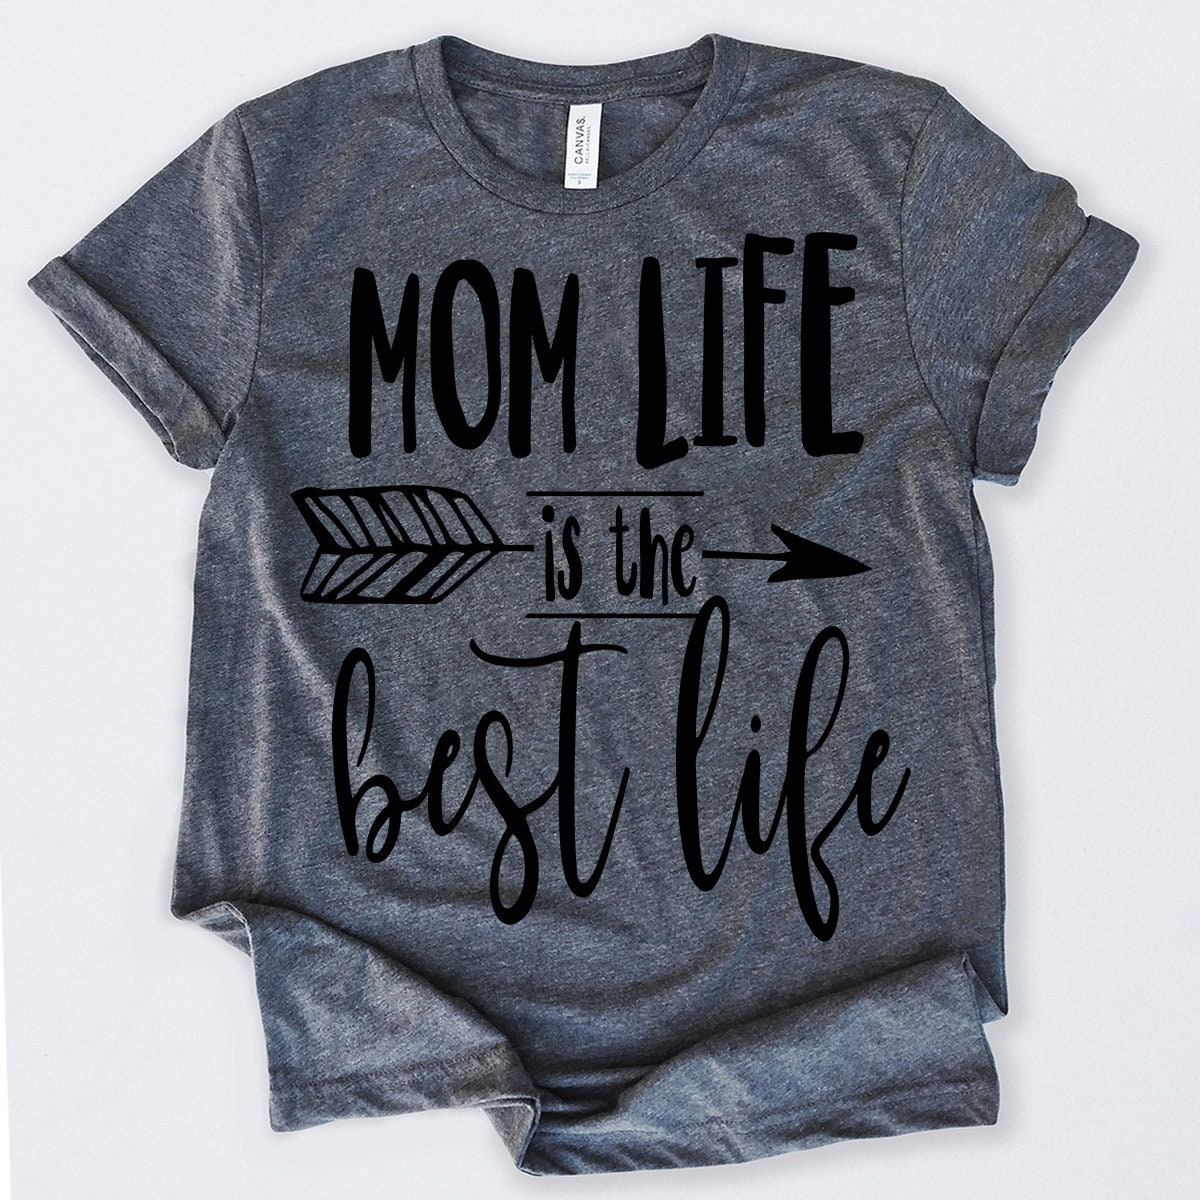 Mom Life Is The Best Life Tshirt Funny Sarcastic Humor Comical | Etsy